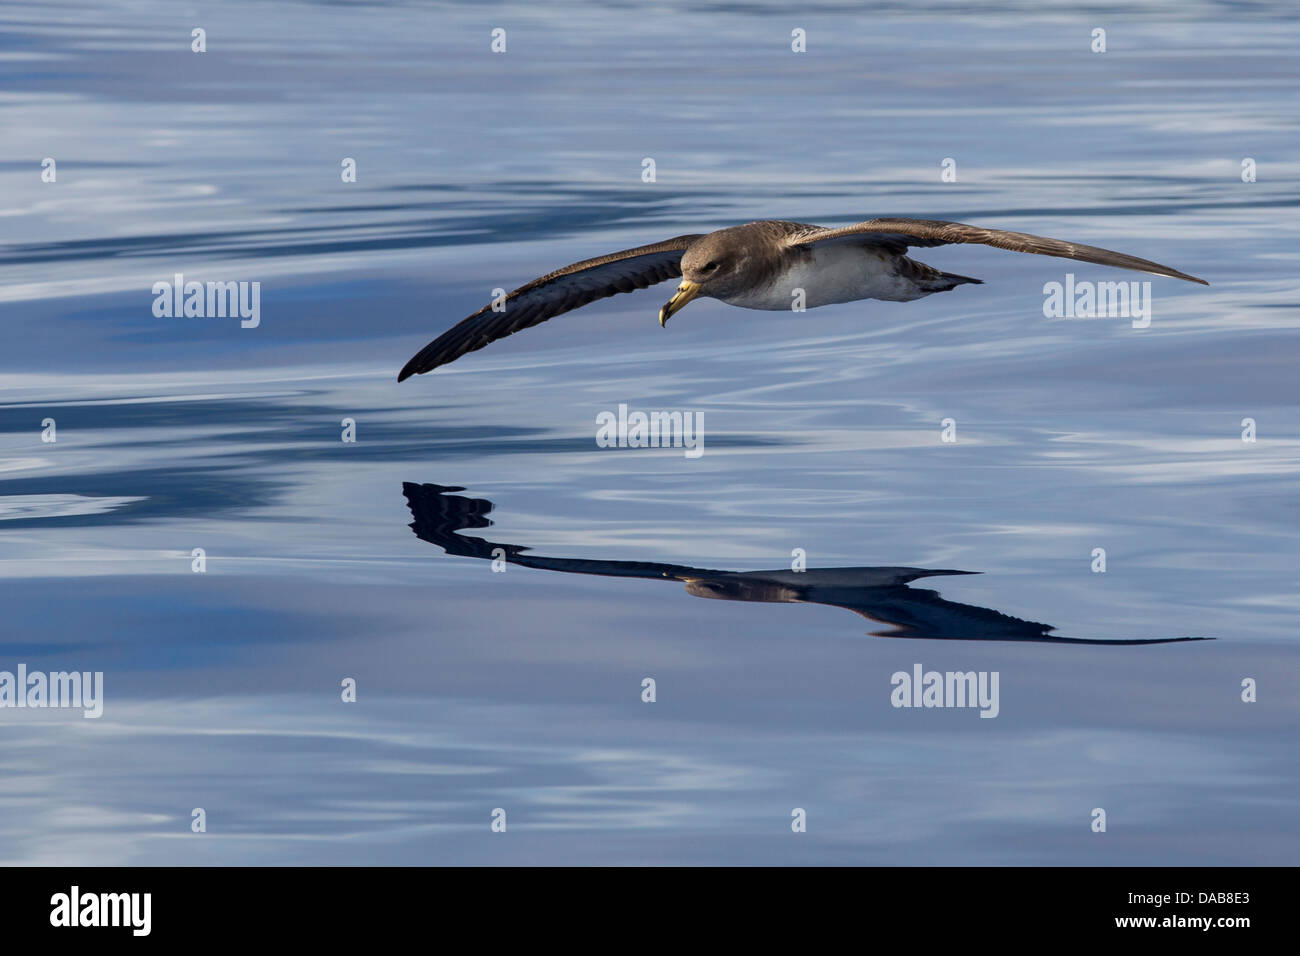 Cory`s Shearwater, Calonectris diomedea, Gelbschnabel-Sturmtaucher soaring close to water surface with reflection visible Stock Photo